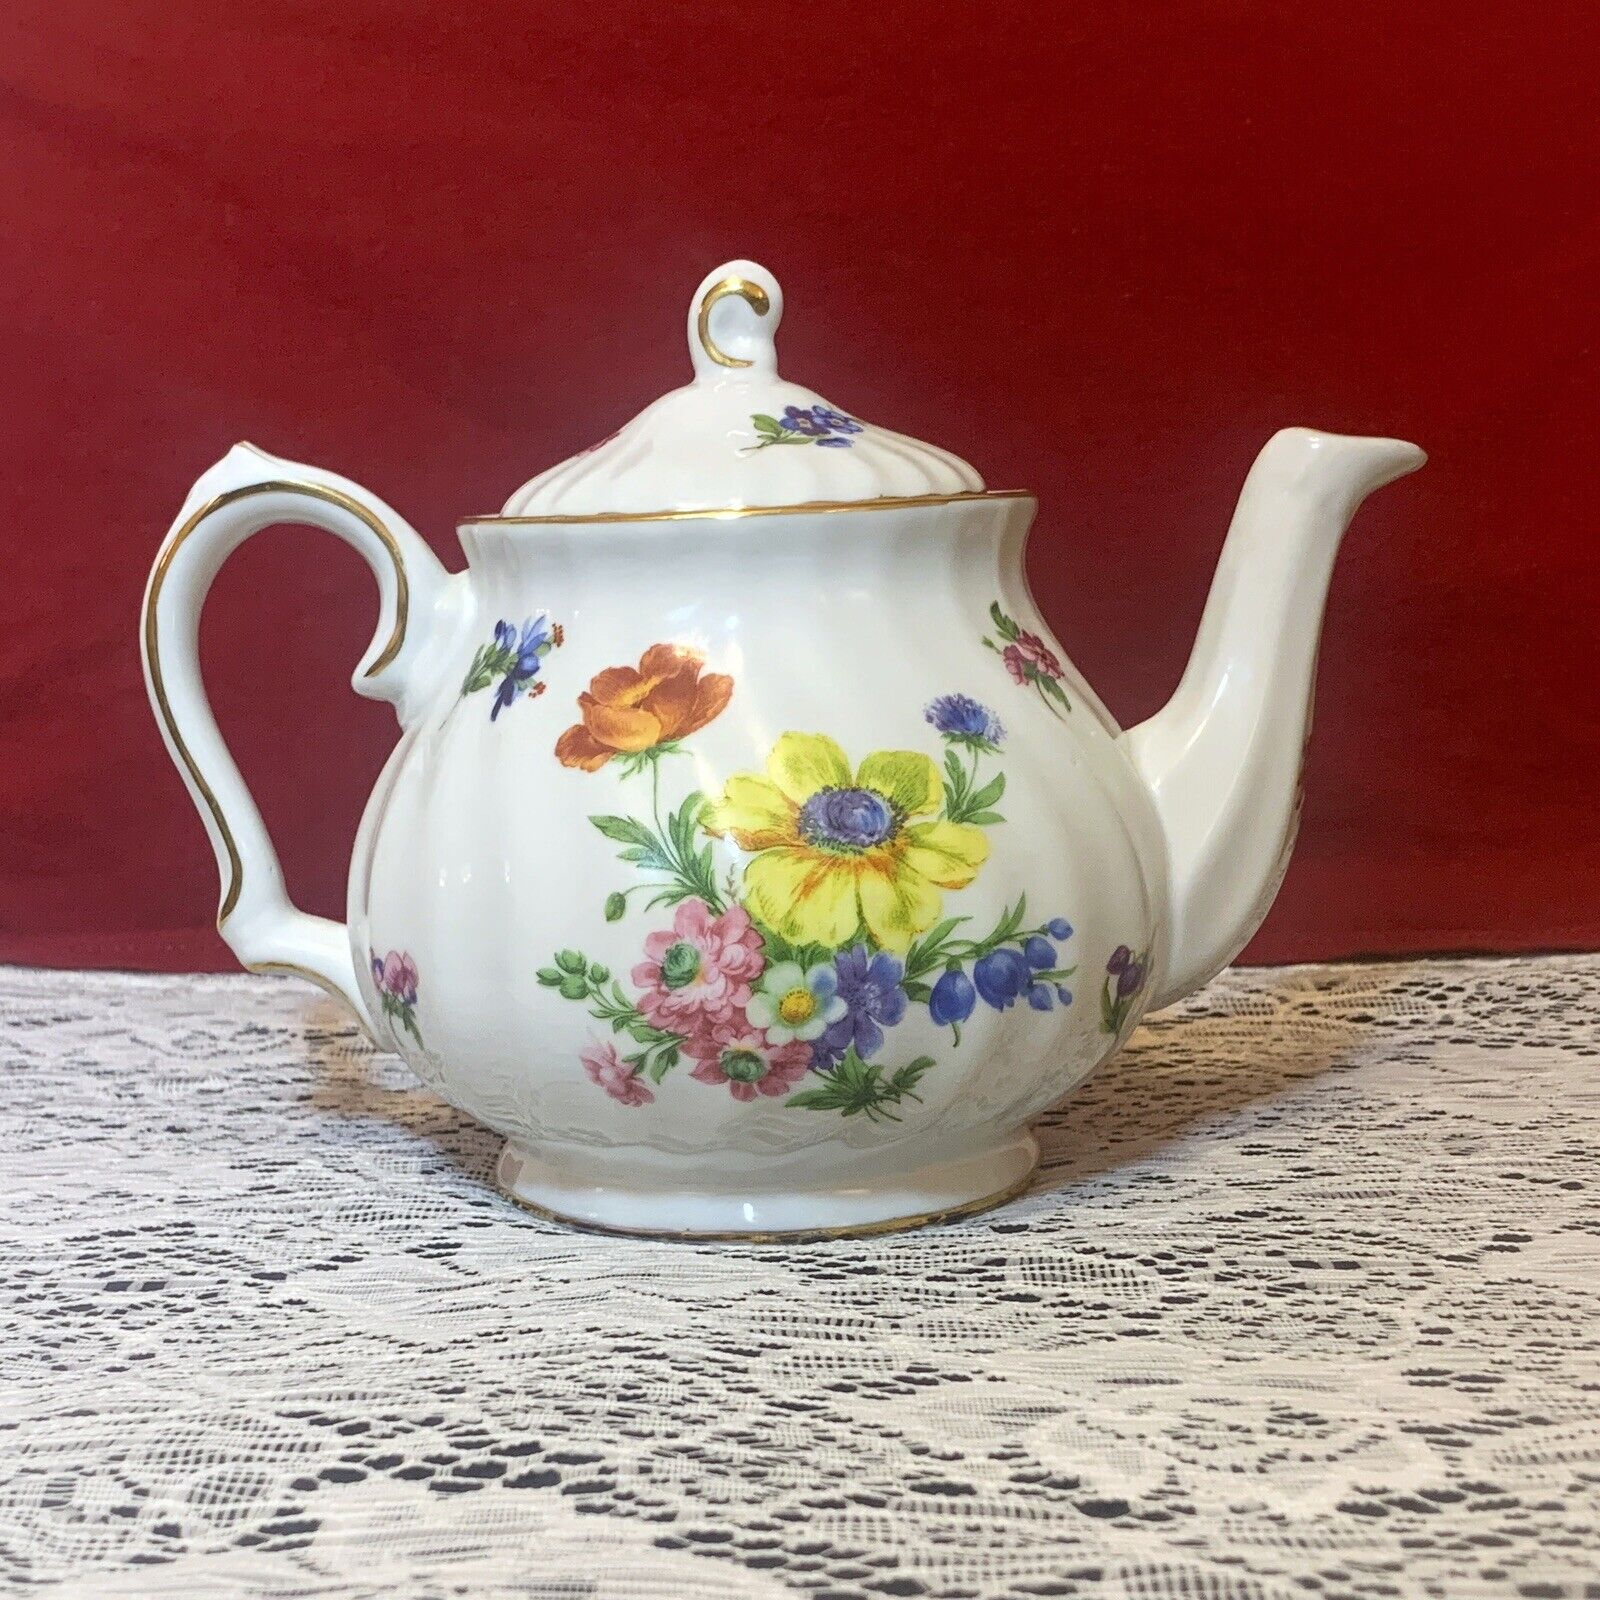 Teapot Royal Danube Porcelain 8 inch with Gold Trim with Pink and Yellow Flowers